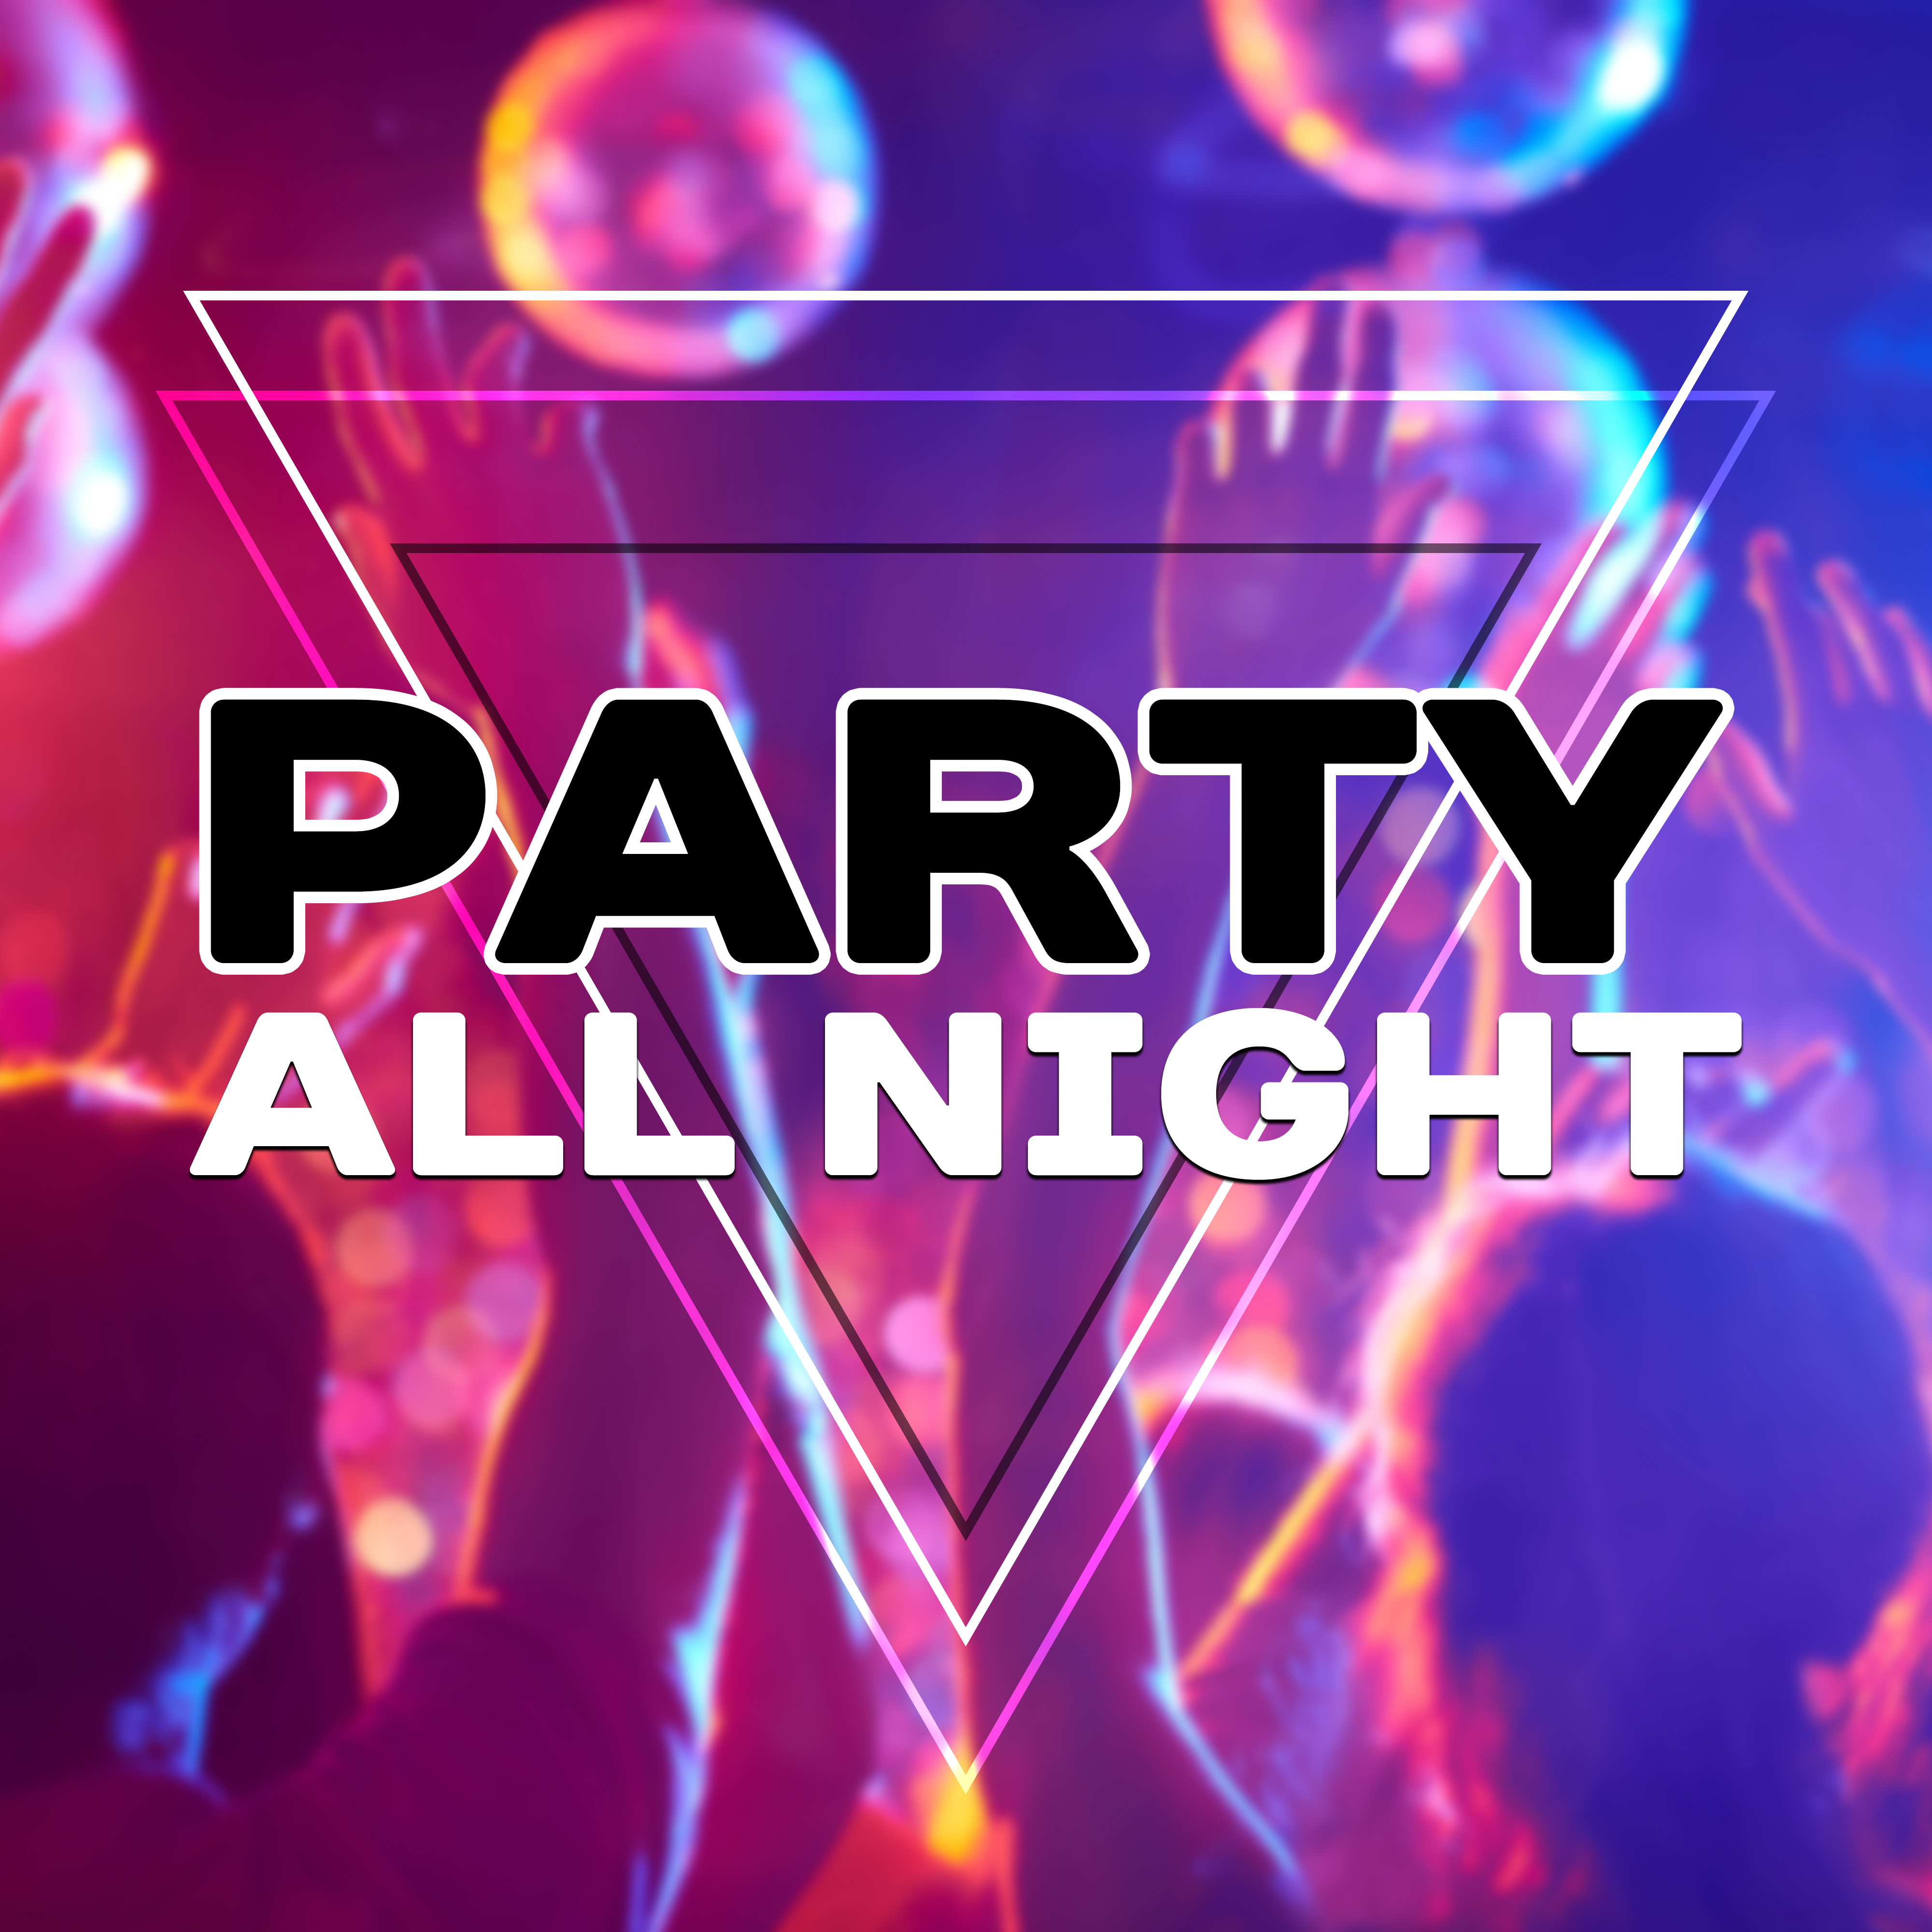 Party All Night – Summer Chill Out 2017, Ibiza Party, Beach Dancefloor, **** Moves